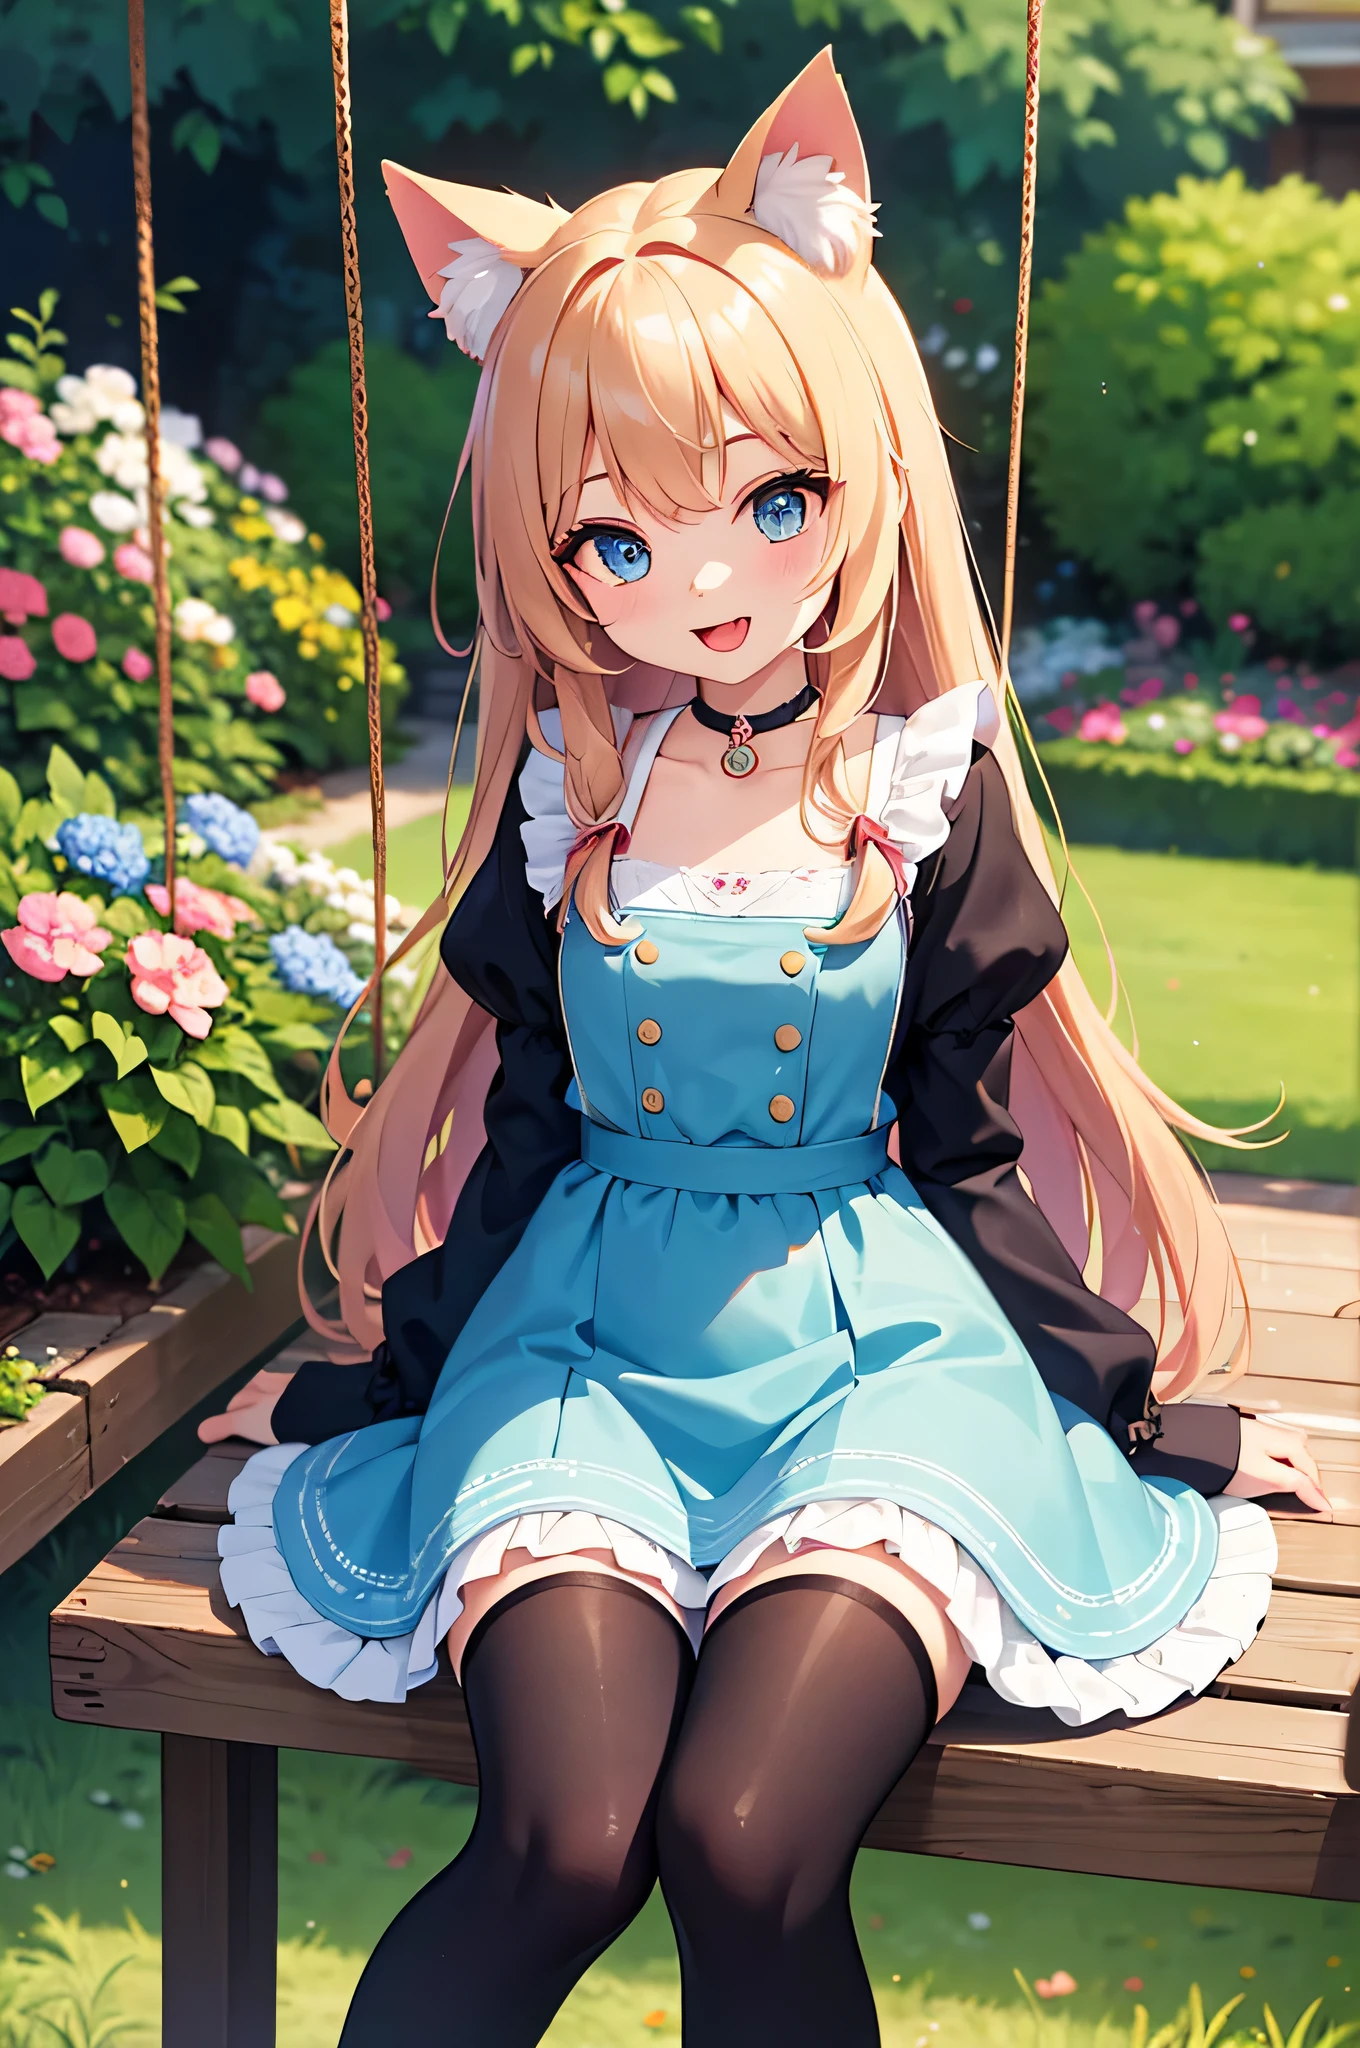 An open-mouthed girl with a furry cat, wearing a choker and a red bow. The girl has long flowing hair and expressive eyes. She is dressed in a cute outfit with a white fur trim, and she is wearing blue stockings. The scene is set in a garden filled with colorful flowers and lush greenery. The girl is sitting on a swing, laughing as the cat playfully jumps around her. The lighting is soft and warm, casting a gentle glow on the scene. The artwork is created using a combination of digital painting and detailed illustrations, resulting in a high-quality, photorealistic image. The colors are vibrant and vivid, with a touch of pastels to create a dreamy atmosphere. The focus is sharp, capturing every intricate detail of the girl's features and the cat's fur. The overall aesthetic is a mix of fantasy and innocence, with a hint of cuteness and charm. The composition is carefully balanced, with the girl and the cat as the focal points, surrounded by the beautiful garden scenery. open mouth, furry cat, girl, choker, red bow, white fur, blue stockings, looking at hind legs, cat's hind legs in fluid, arousal, looking at us, tongue visible, good quality, slender body, correct proportions, two hind legs (furry feet), two front legs (furry hands), correct muzzle, semen on the muzzle, drooling, excretions, submission